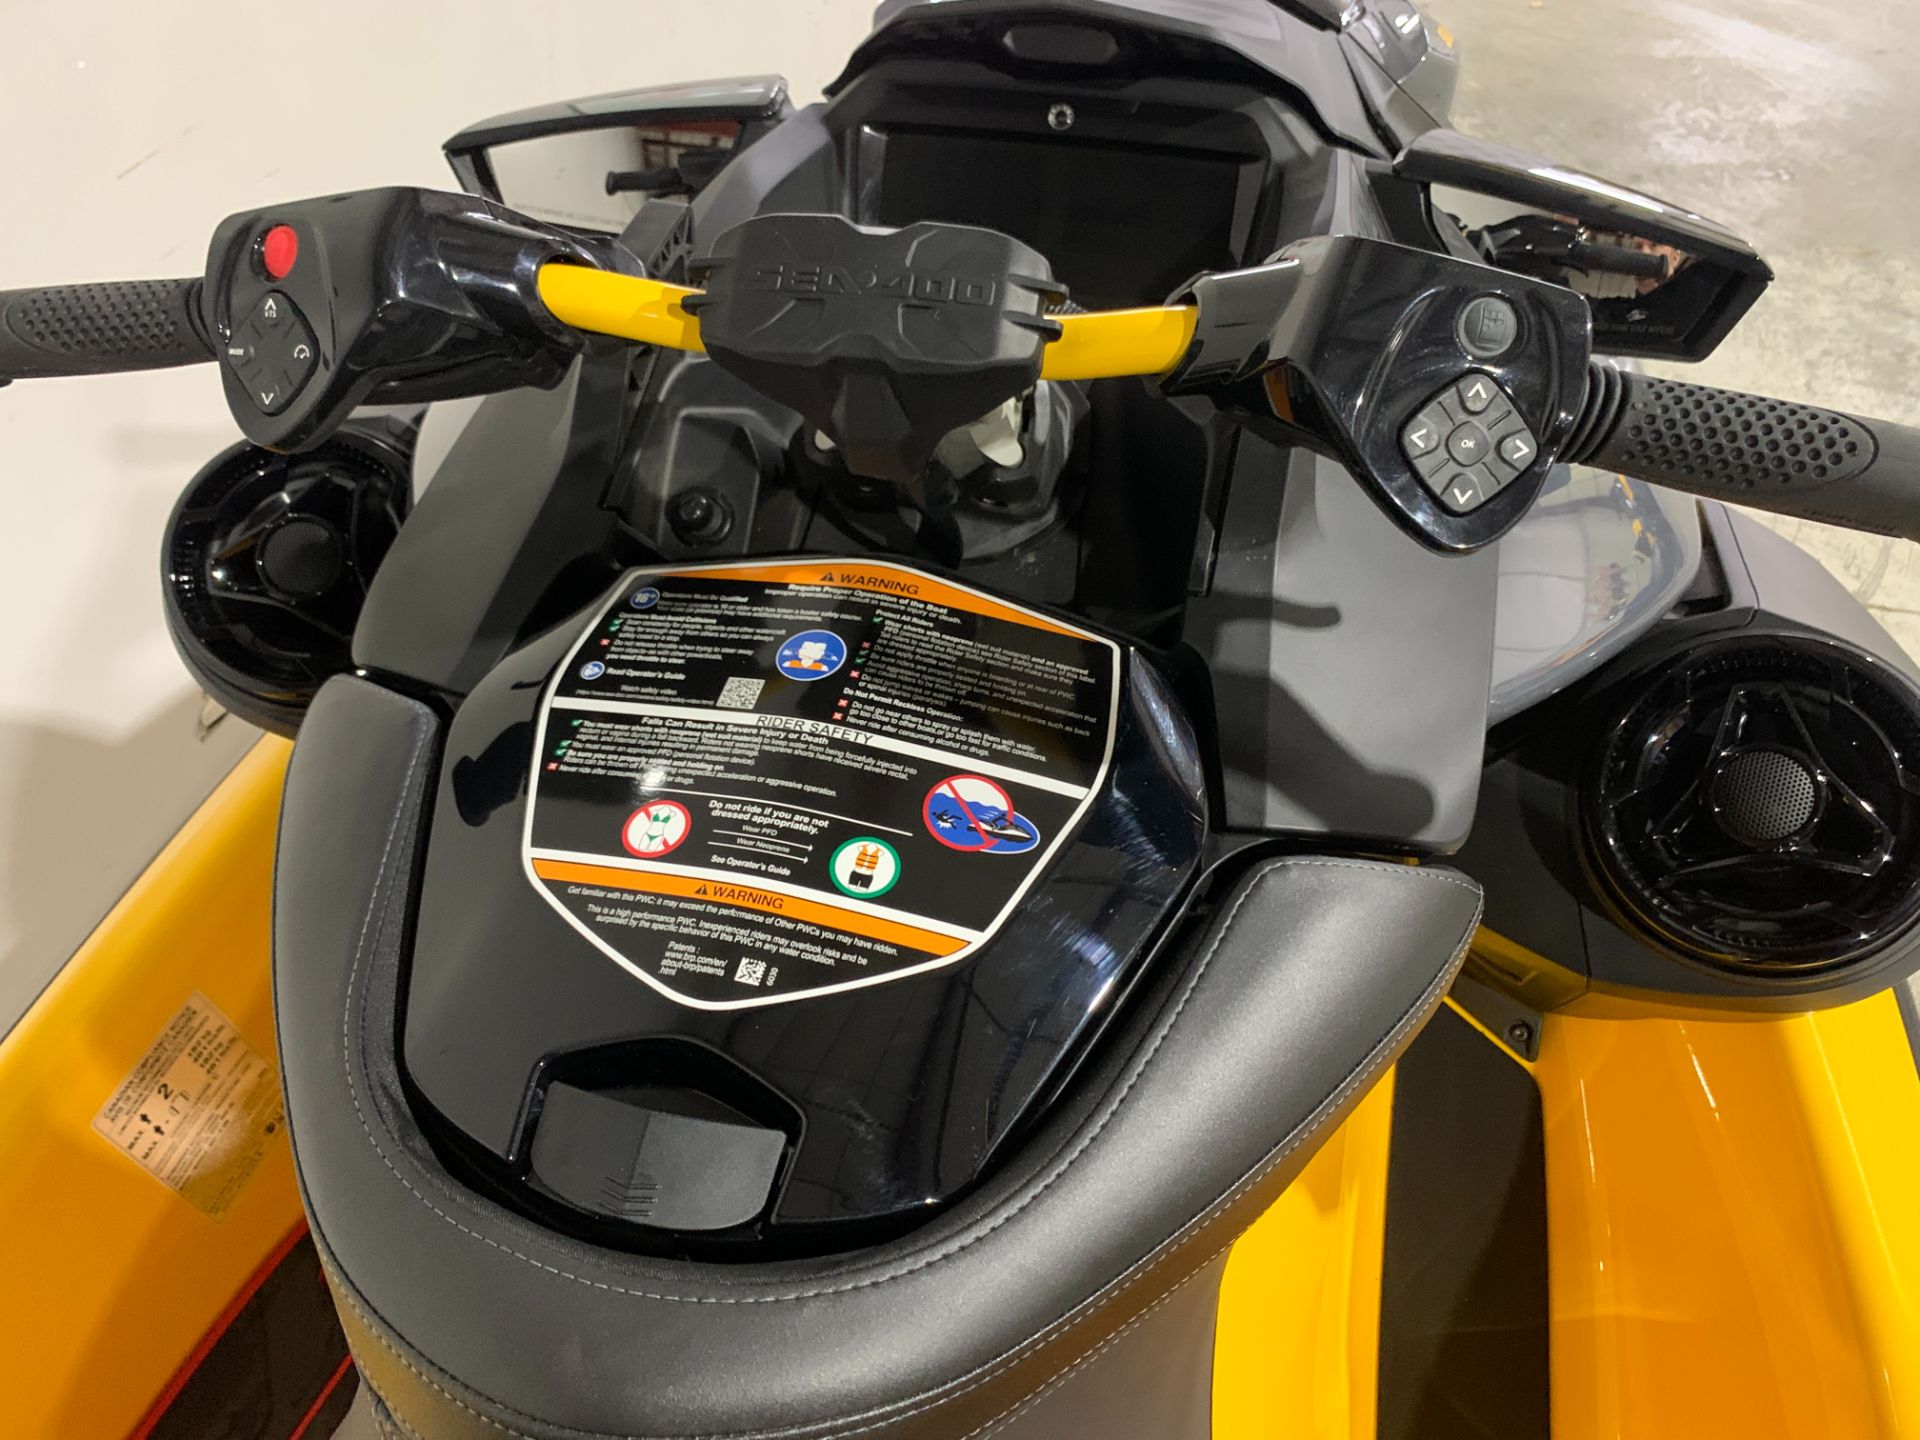 2022 Sea-Doo RXP-X 300 + Tech Package in Fort Collins, Colorado - Photo 6